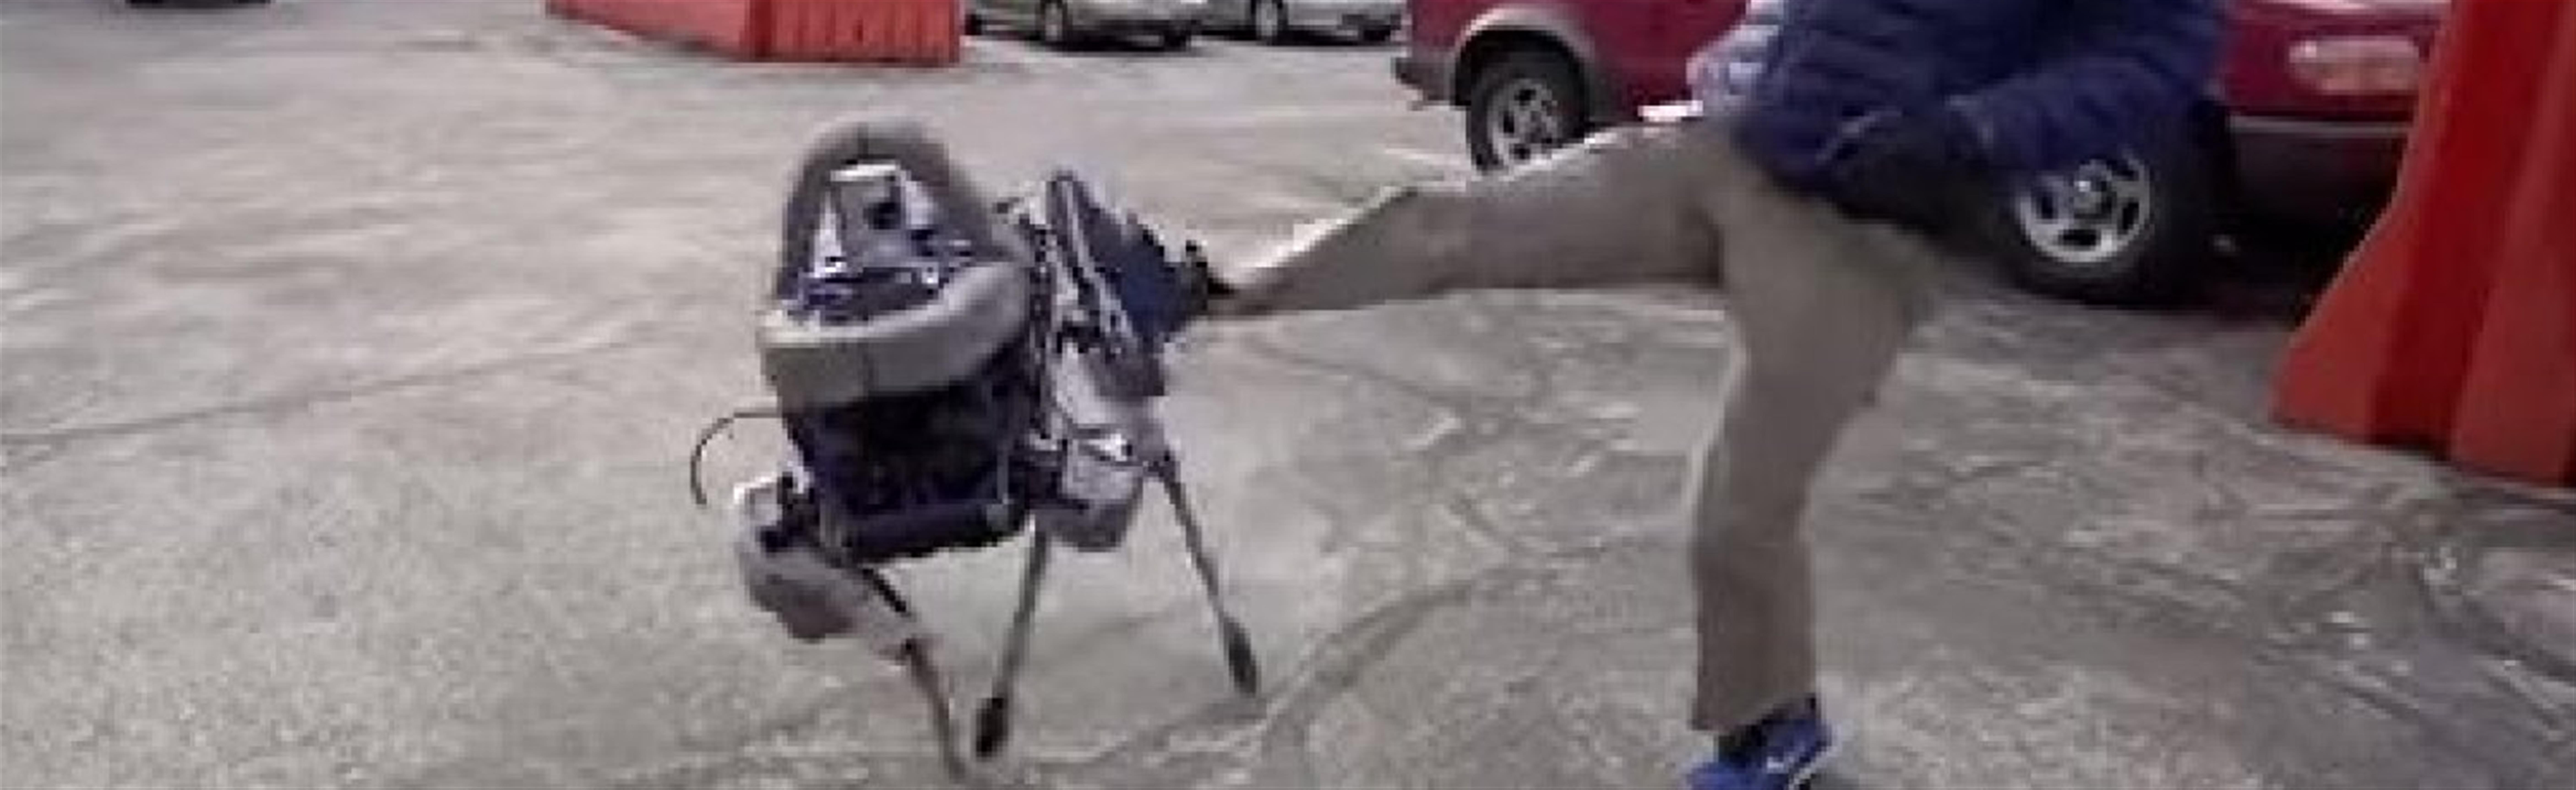 Robotic Dog “Spot” could deliver your next Package